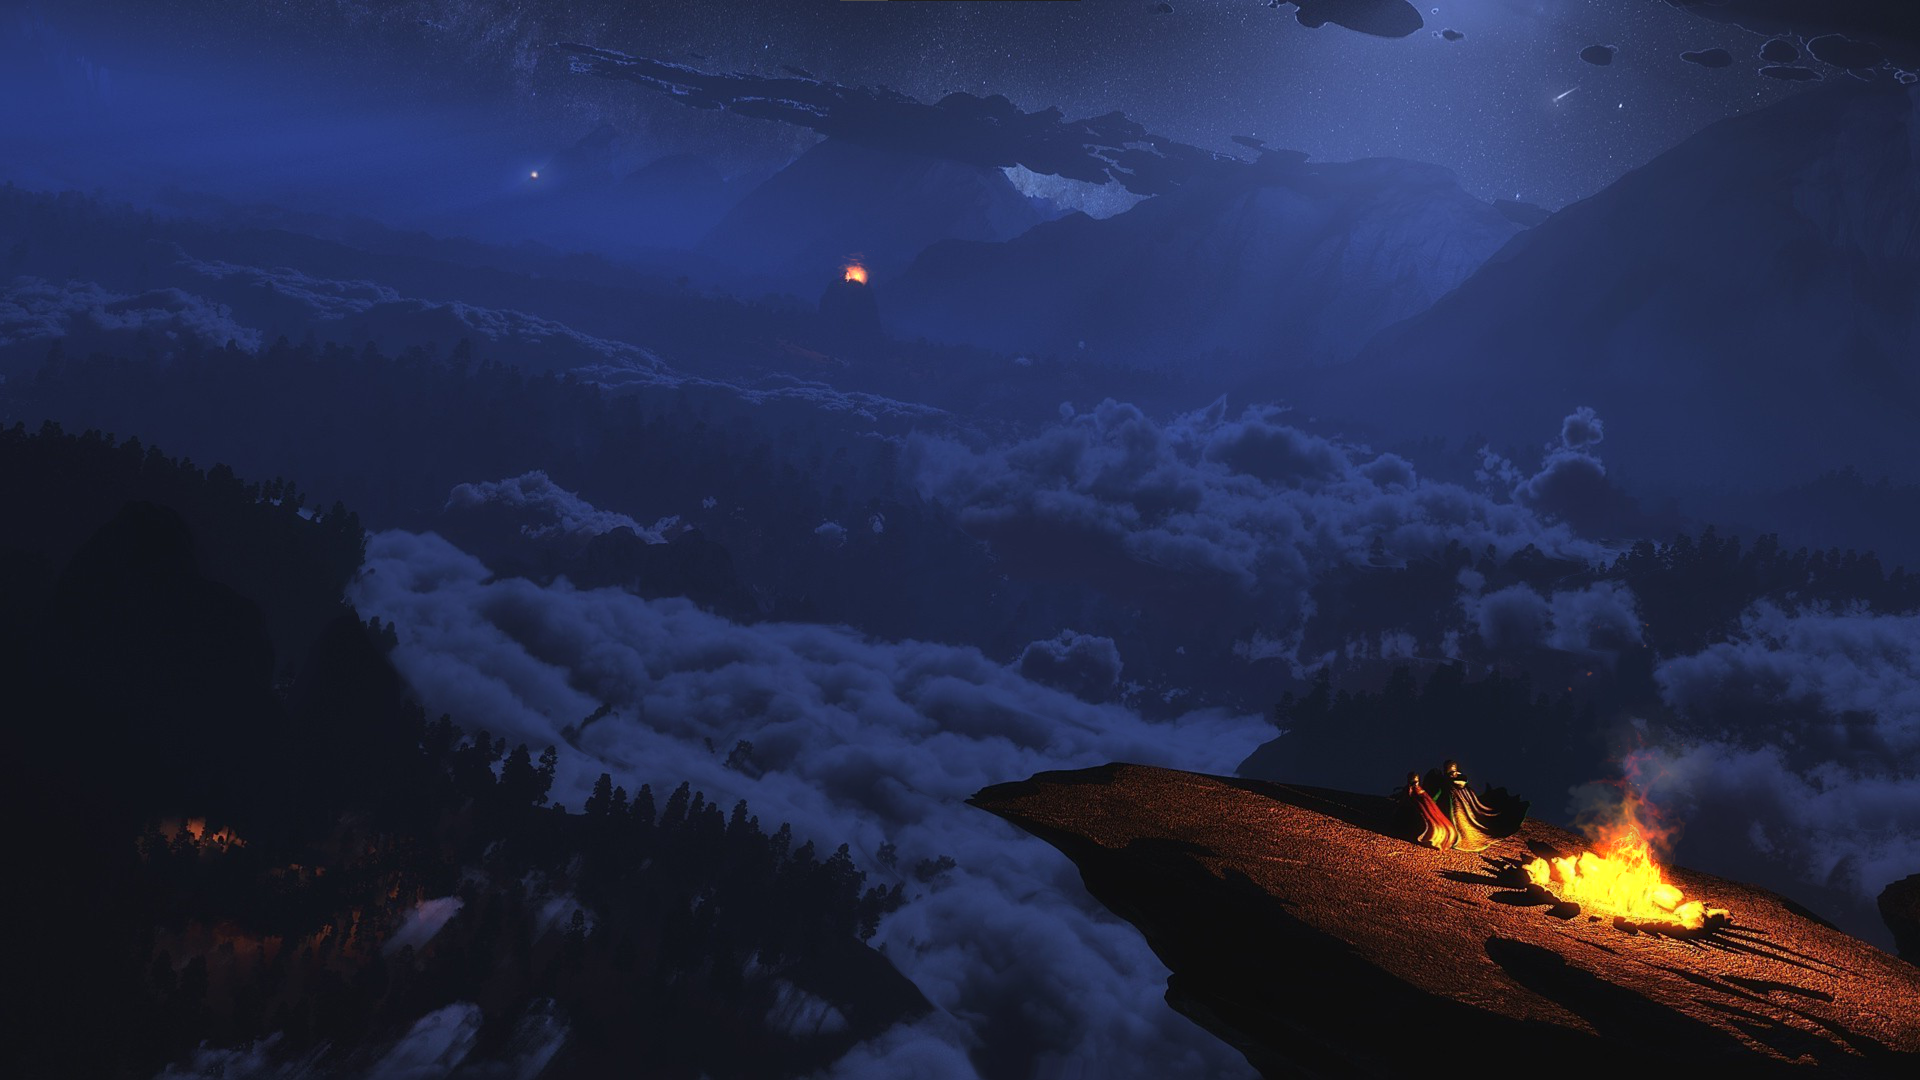 General 1920x1080 artwork isolated camping night campfire digital art low light fire stars sky landscape trees mountains forest